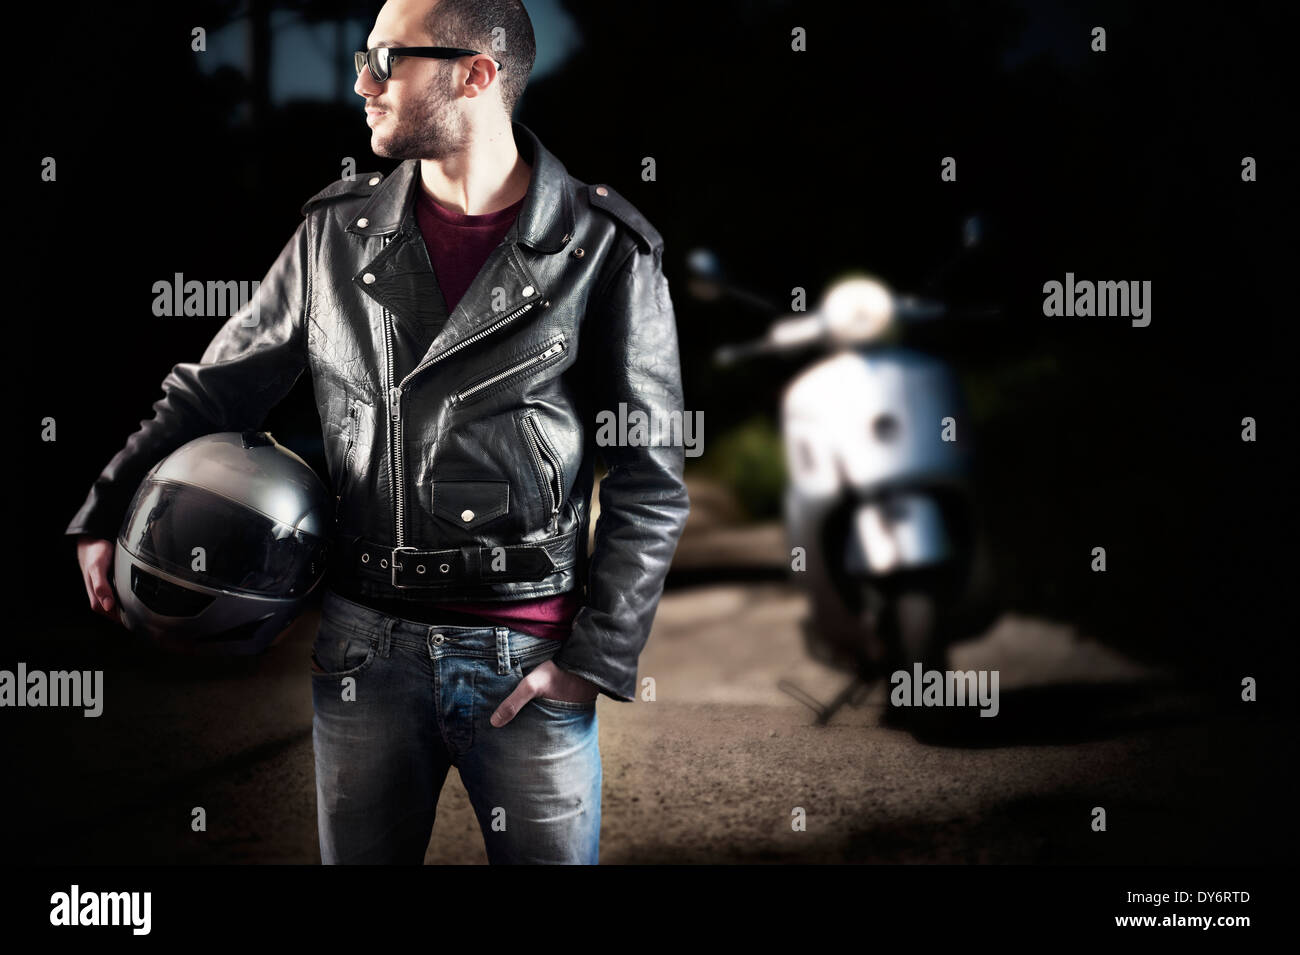 Biker in leather jacket posing with his scooter Stock Photo